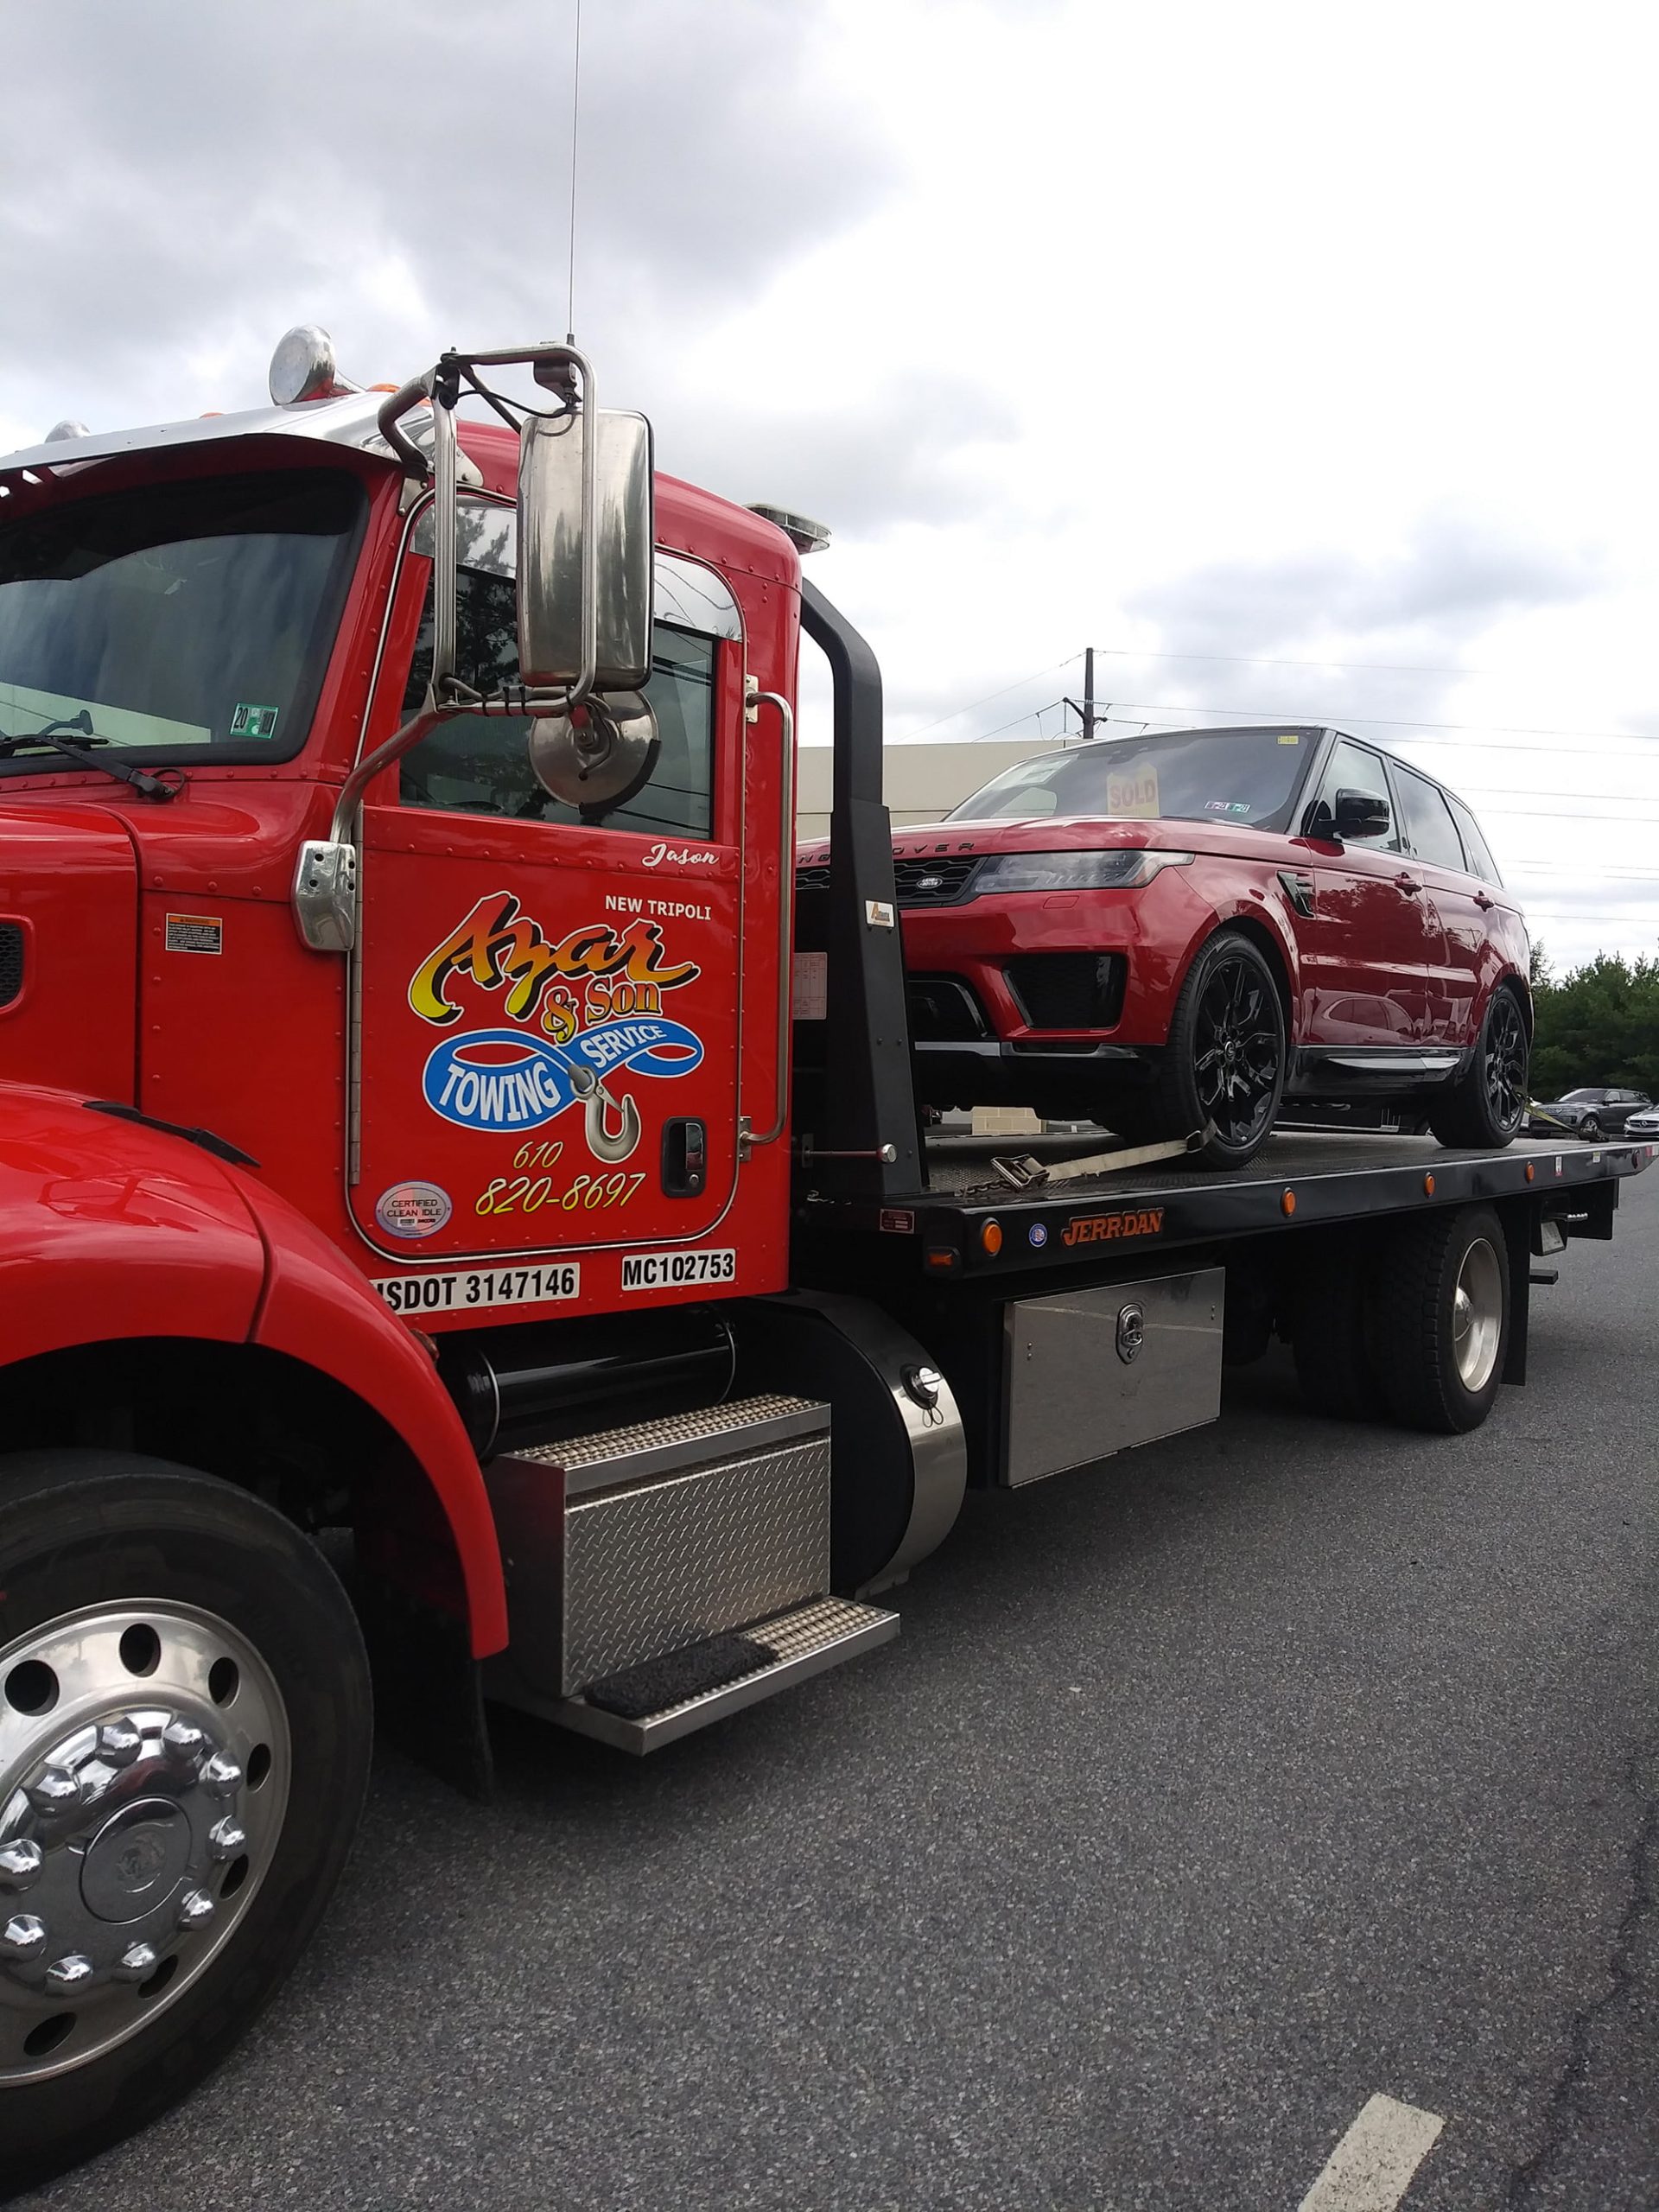 A red-cabbed Azar flatbed tow truck hauling a red luxury SUV